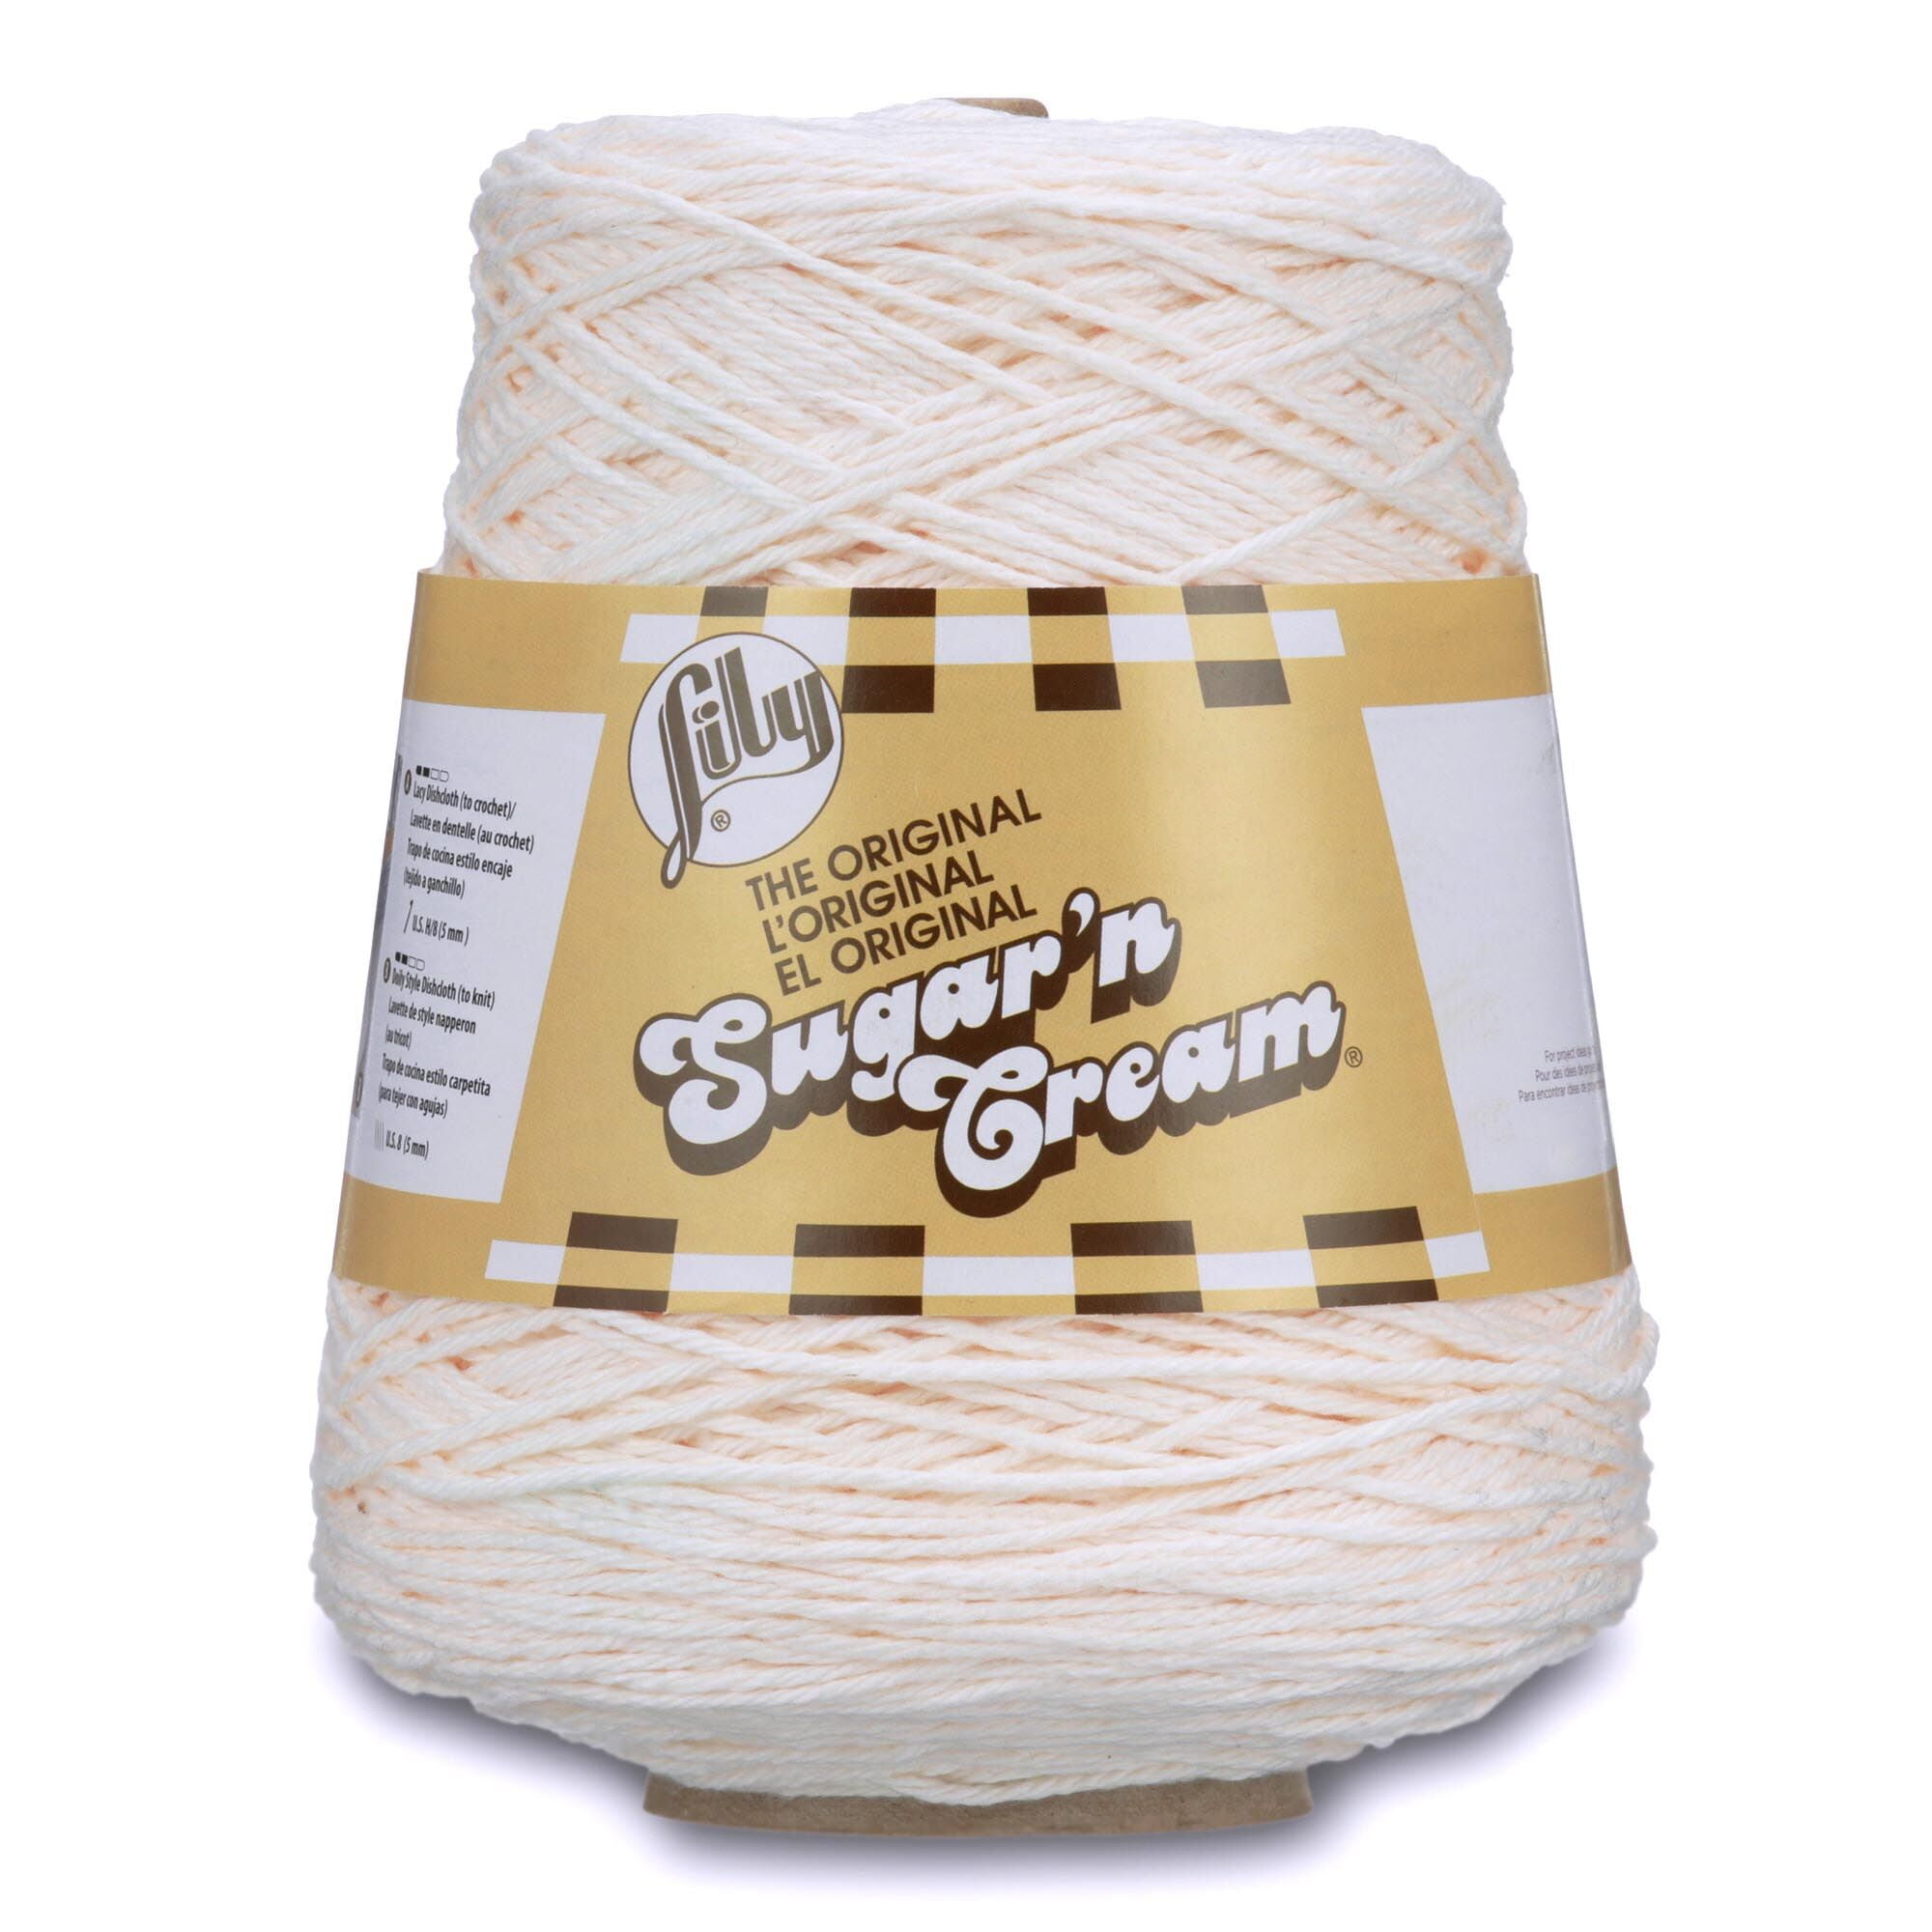 Big Squish Cotton Blend Corded Yarn, On Cone, Sold by the Gram